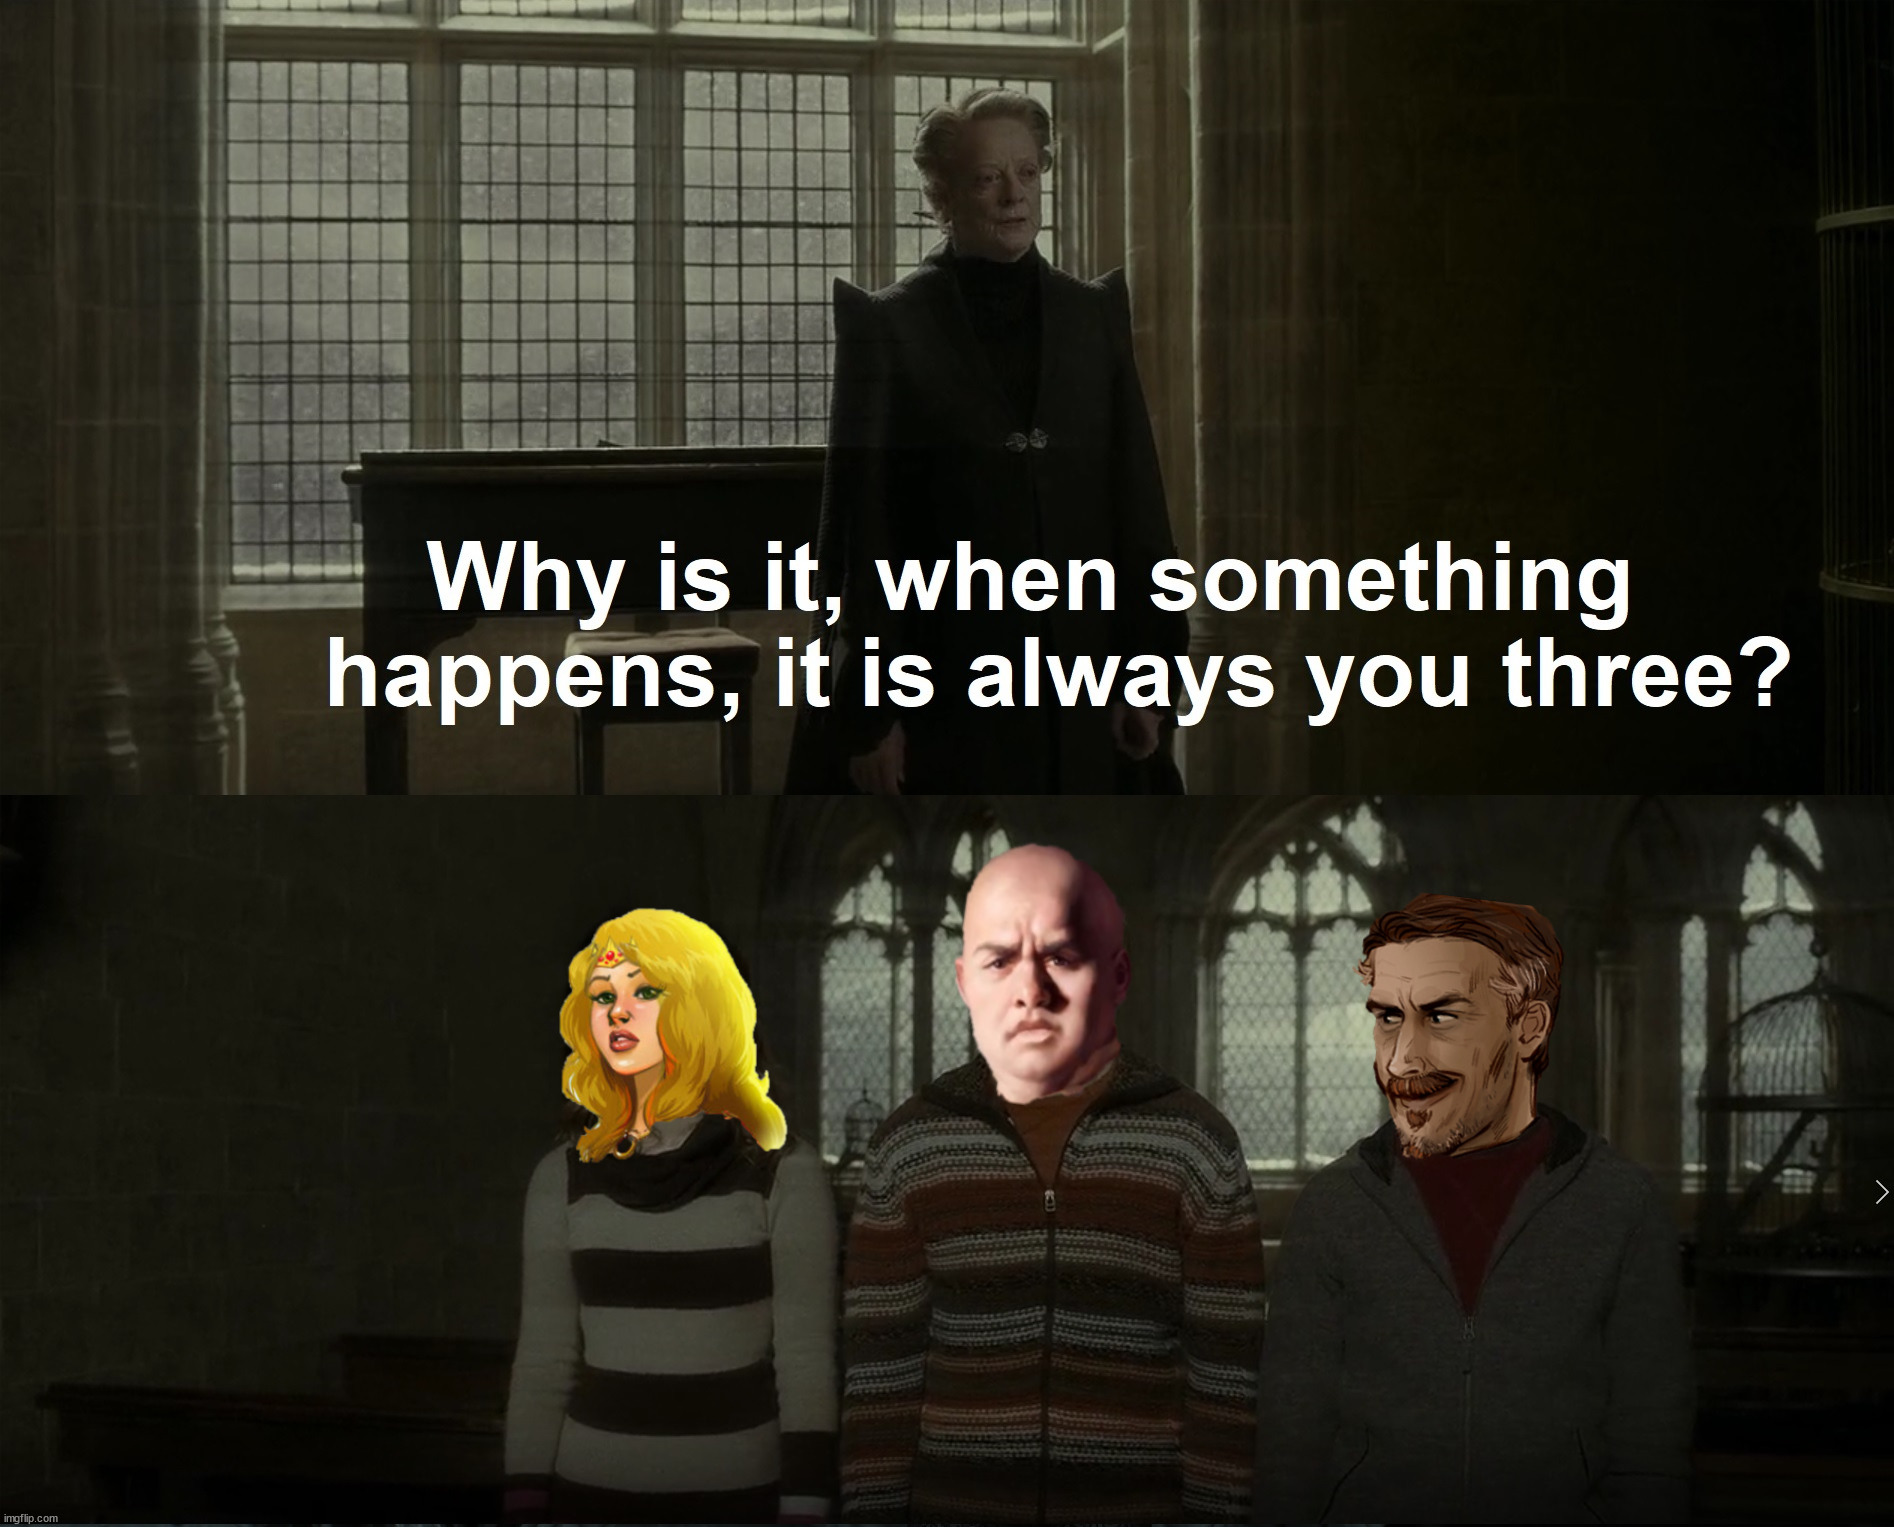 Those three responsible for 99% of the problems in Westeros | image tagged in why is it when something happens it is always you three,asoiaf,a song of ice and fire,cersei lannister,littlefinger,varys | made w/ Imgflip meme maker